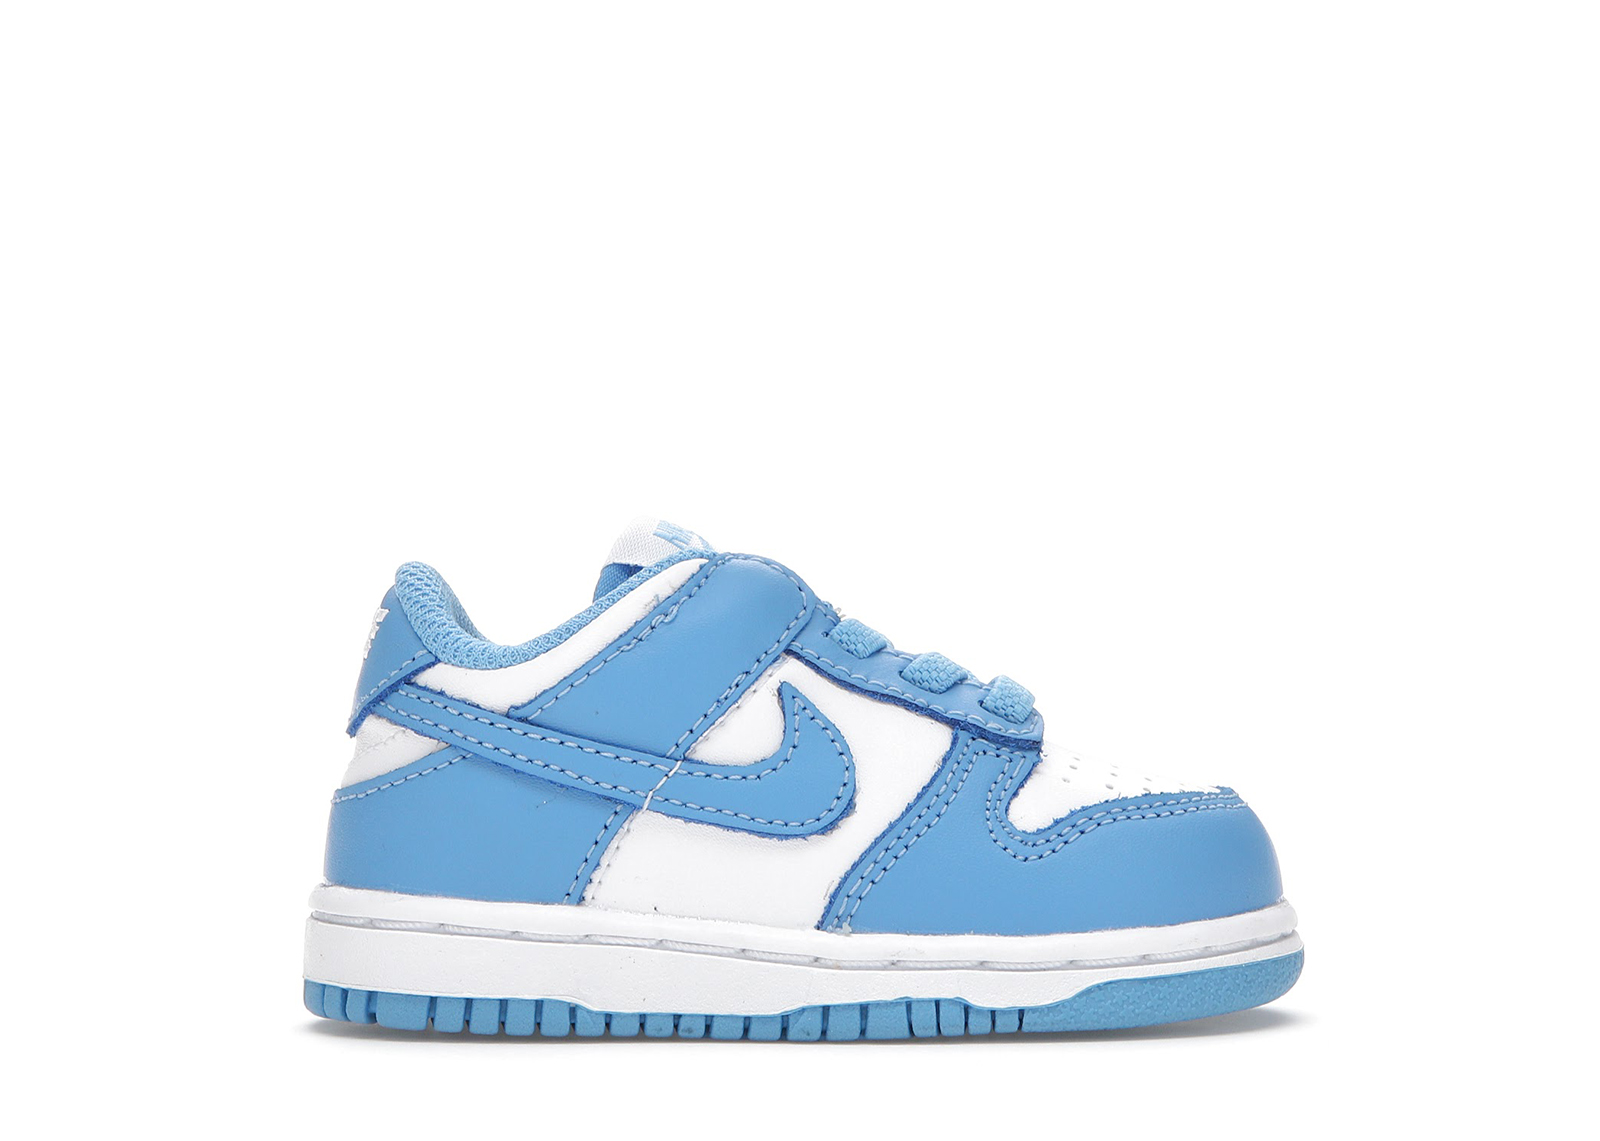 NIKE dunk low unc